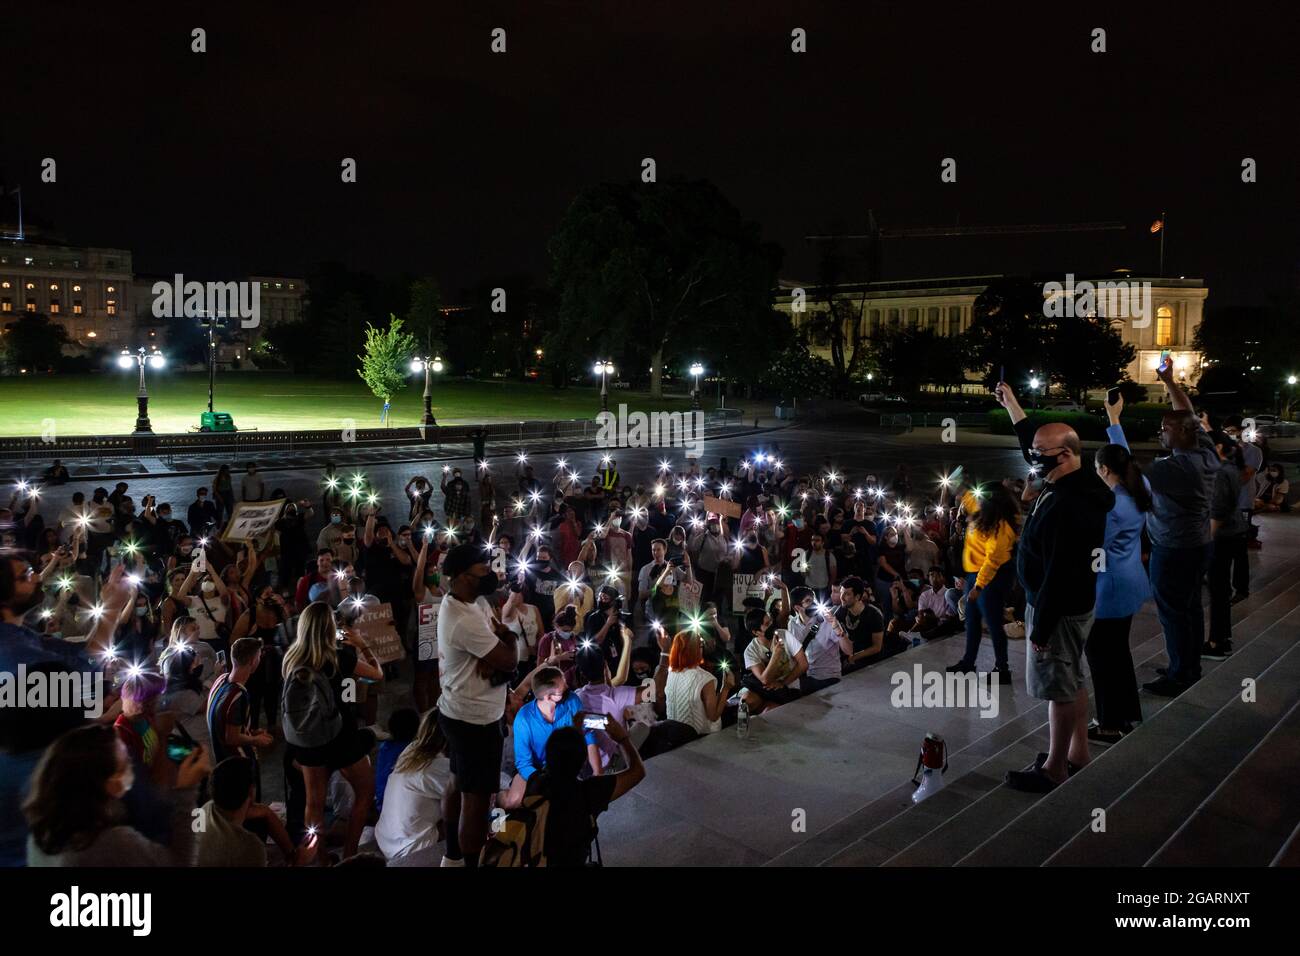 Washington, DC, USA. 1st Aug, 2021. Pictured: Protesters at a midnight rally on the steps of the Capitol hold their phones in the air at Congresswoman Cori Bush's (D-MO) request, in a moment of silence to remember those who have been lost due to homelessness and the pandemic. Representatives Jim McGovern (D-MA), Sara Jacobs (D-CA), Jamaal Bowman (D-NY), and Alexandria Ocasio-Cortez (D-NY) stand behind her with phones raised. Congresswoman Bush called the rally to protest the expiration of the eviction moratorium at midnight August 1. Credit: Allison Bailey/Alamy Live News Stock Photo